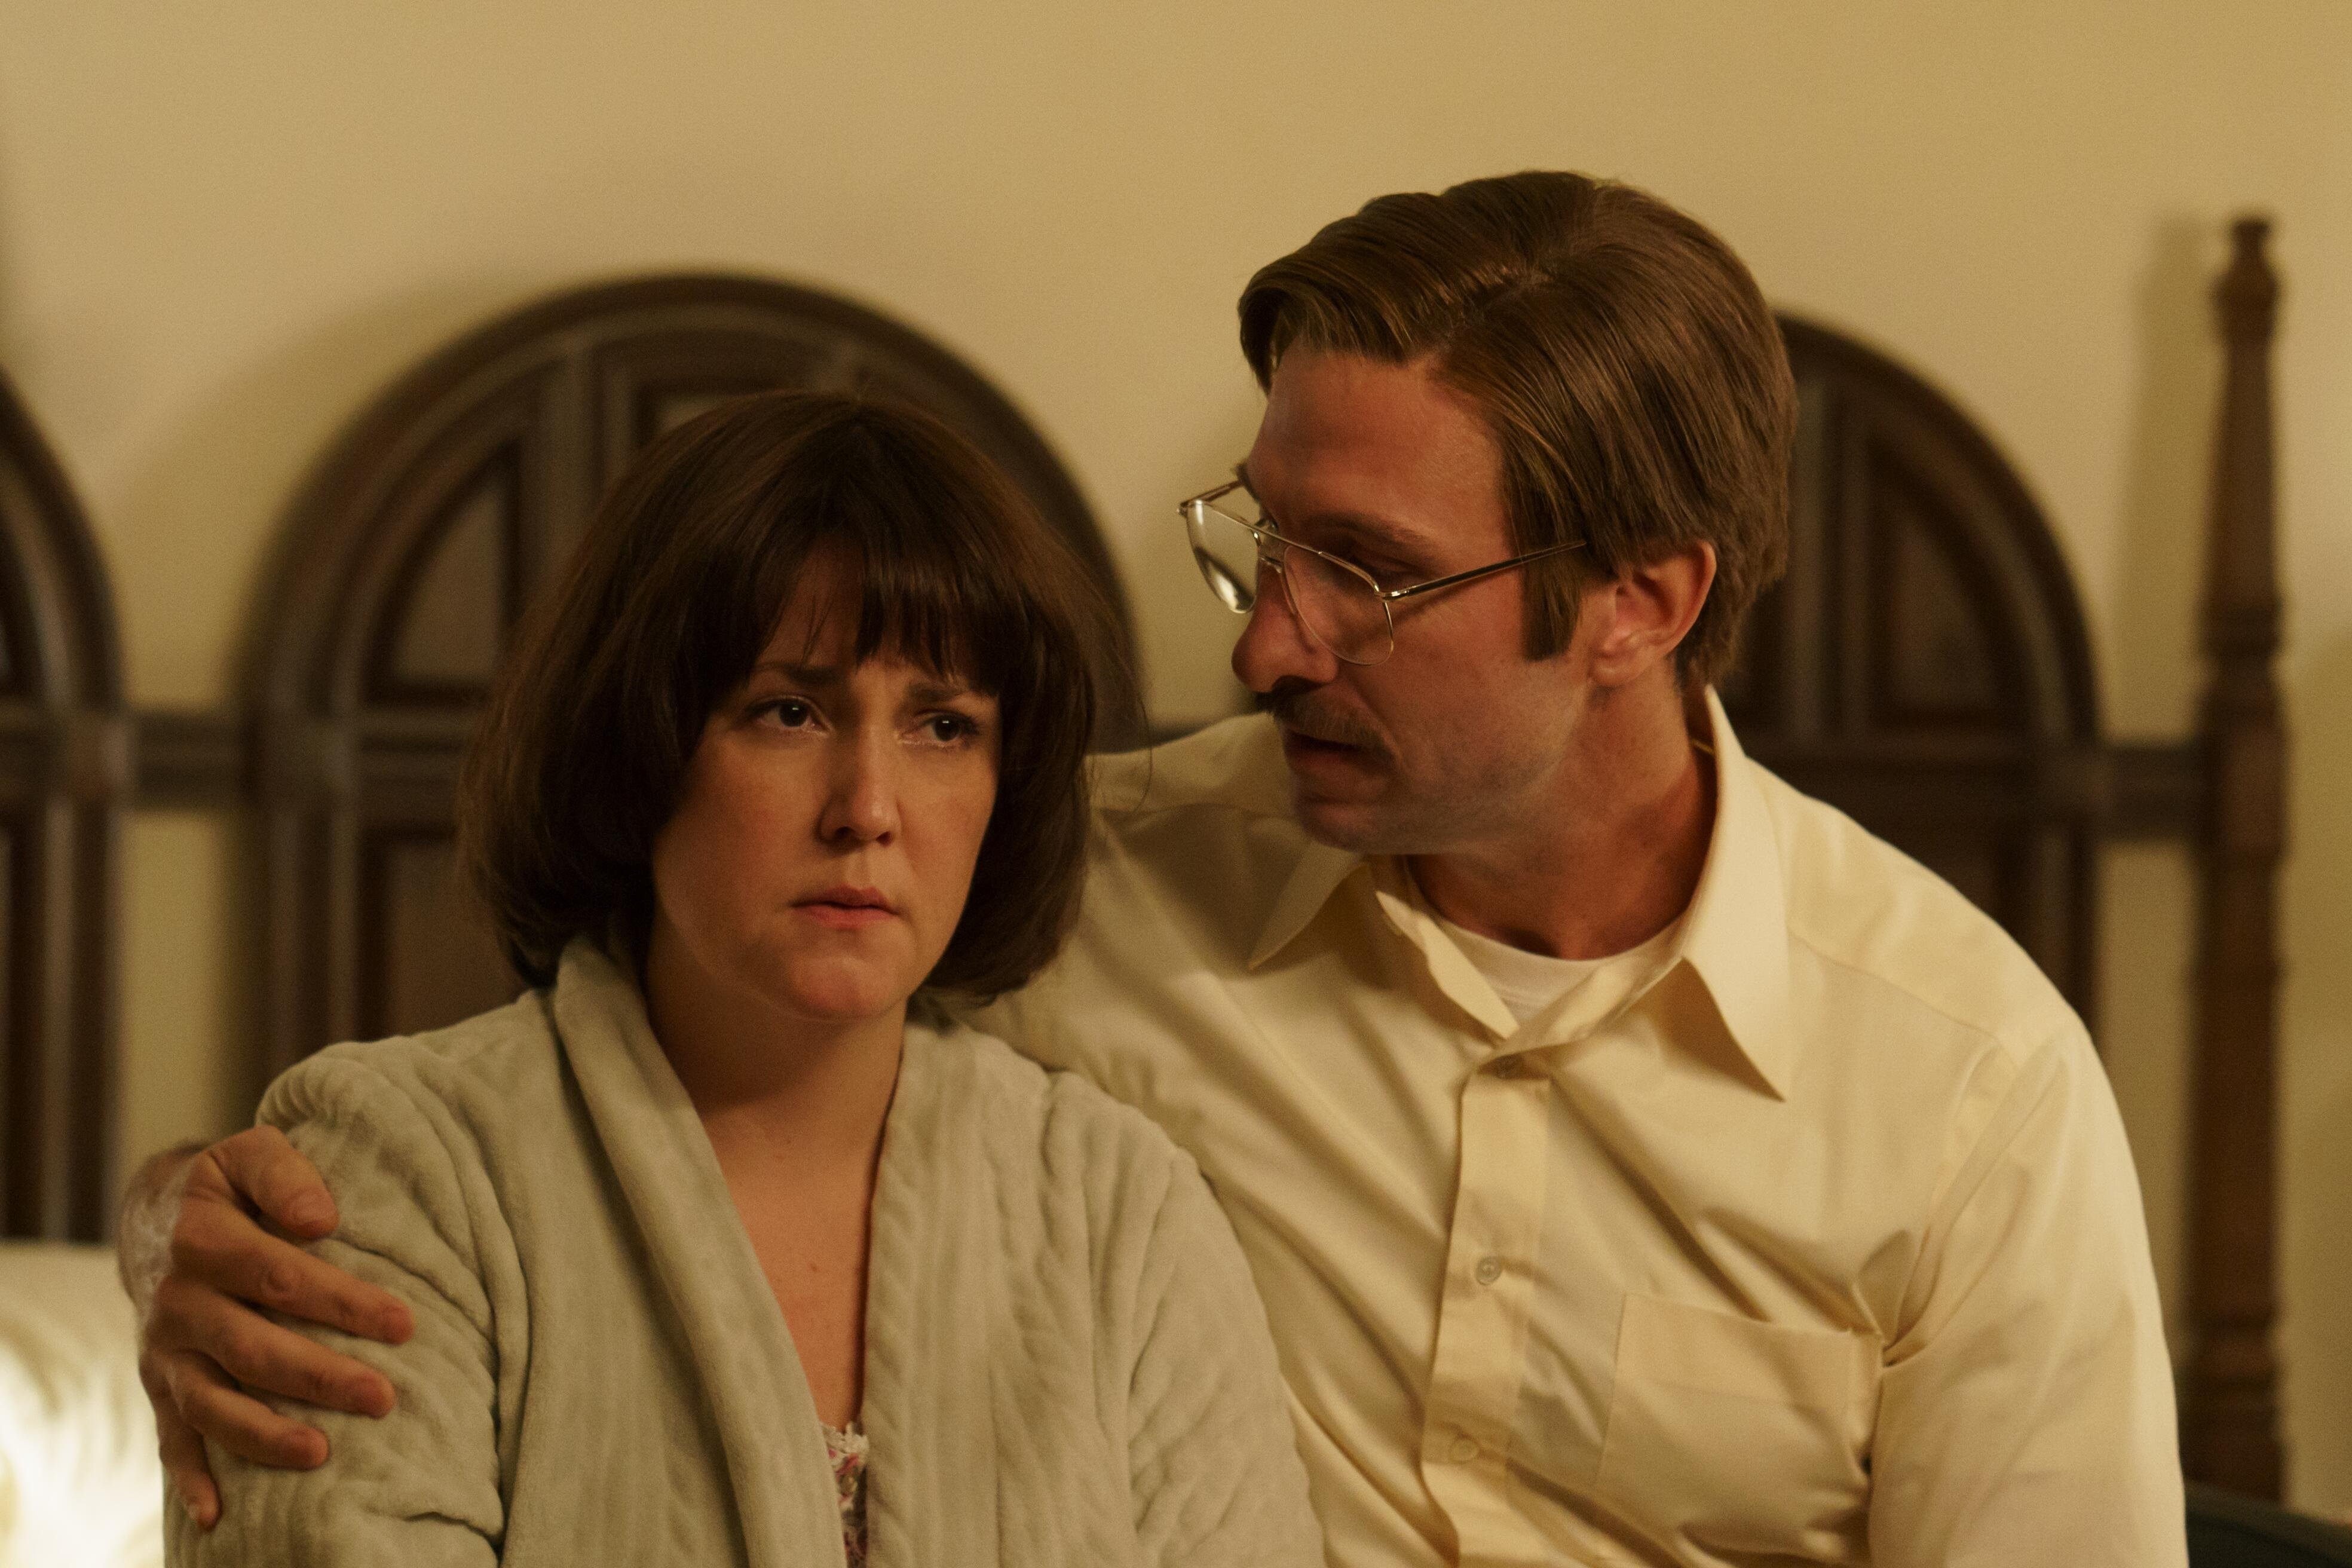 'Candy' Episode 3 Melanie Lynskey as Betty Gore and Pablo Schreiber as Allan Gore looking at a very mad Betty